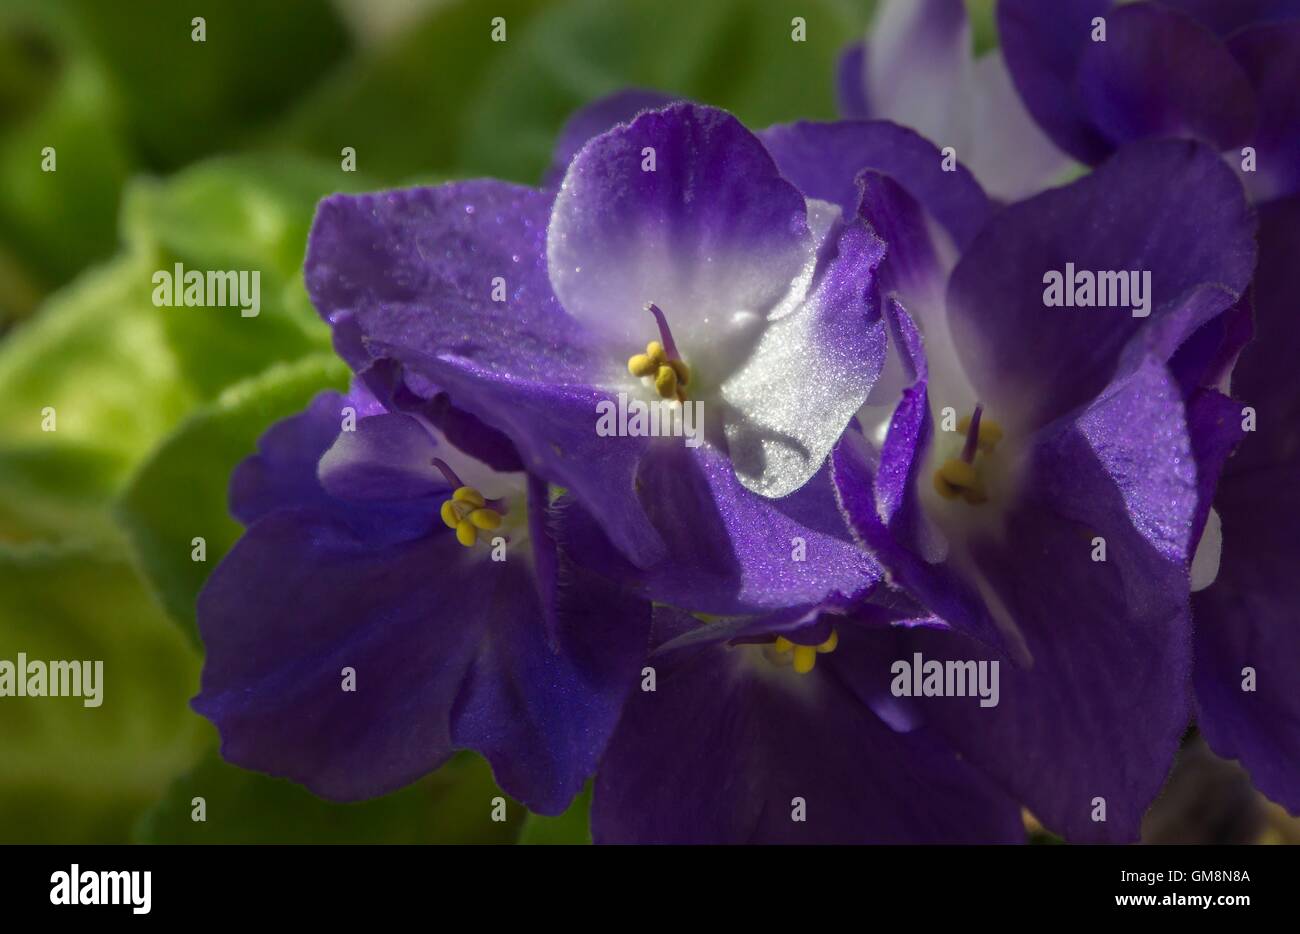 close up image of violet flower Stock Photo